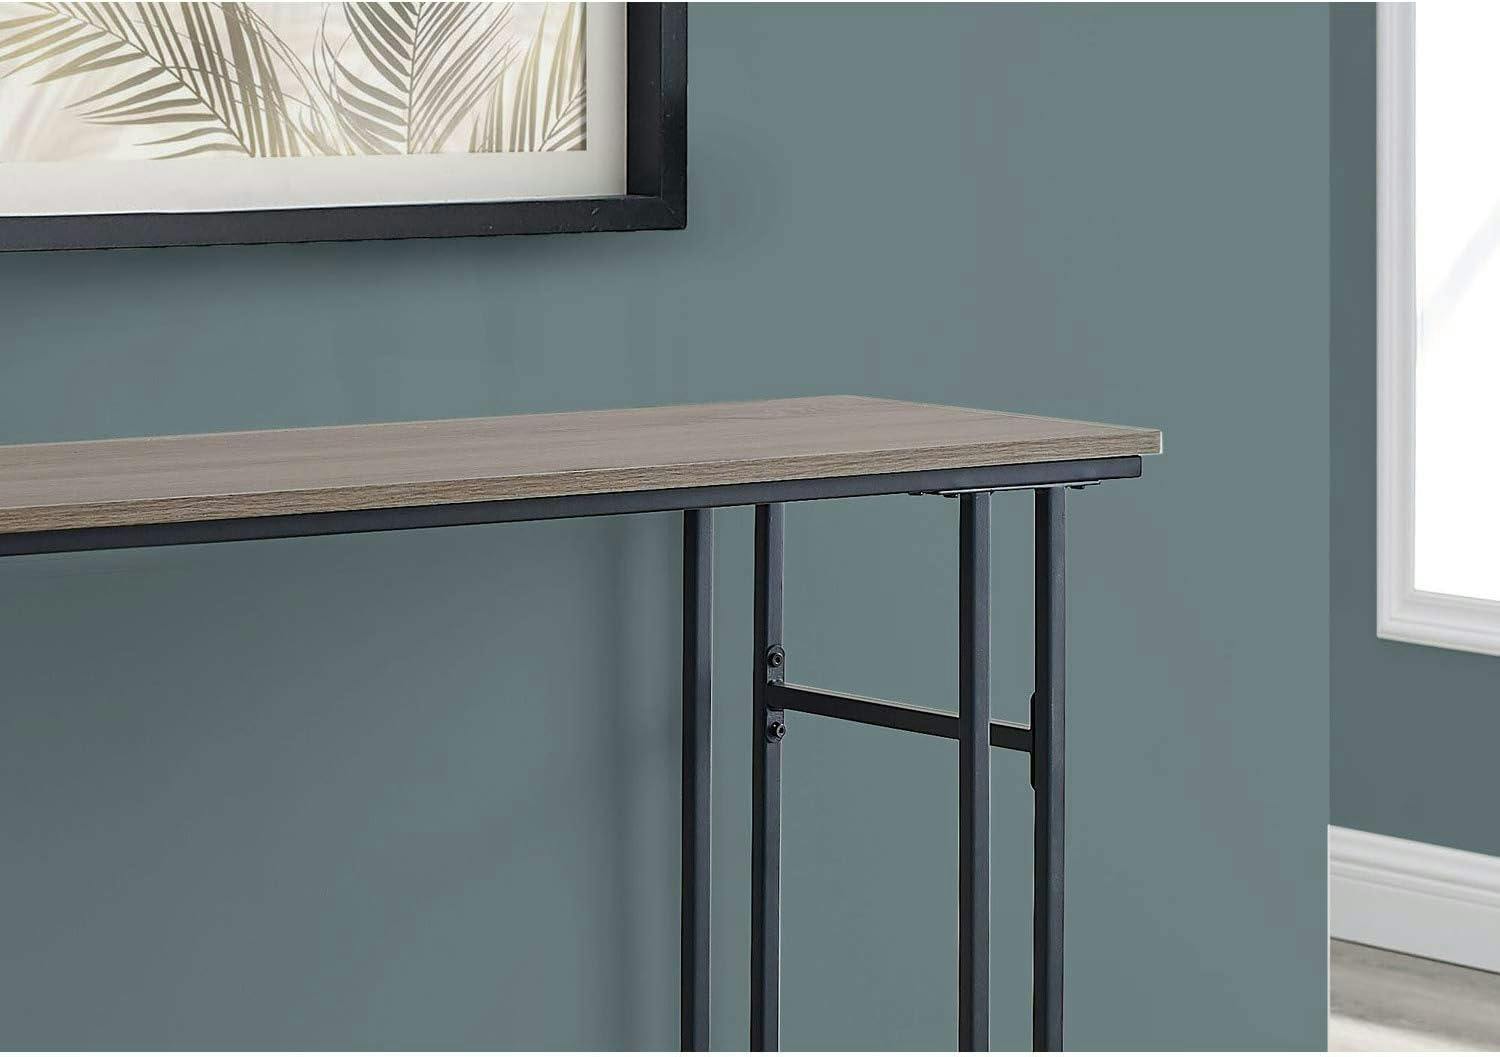 Contemporary Taupe Wood and Black Metal Console Table with Storage